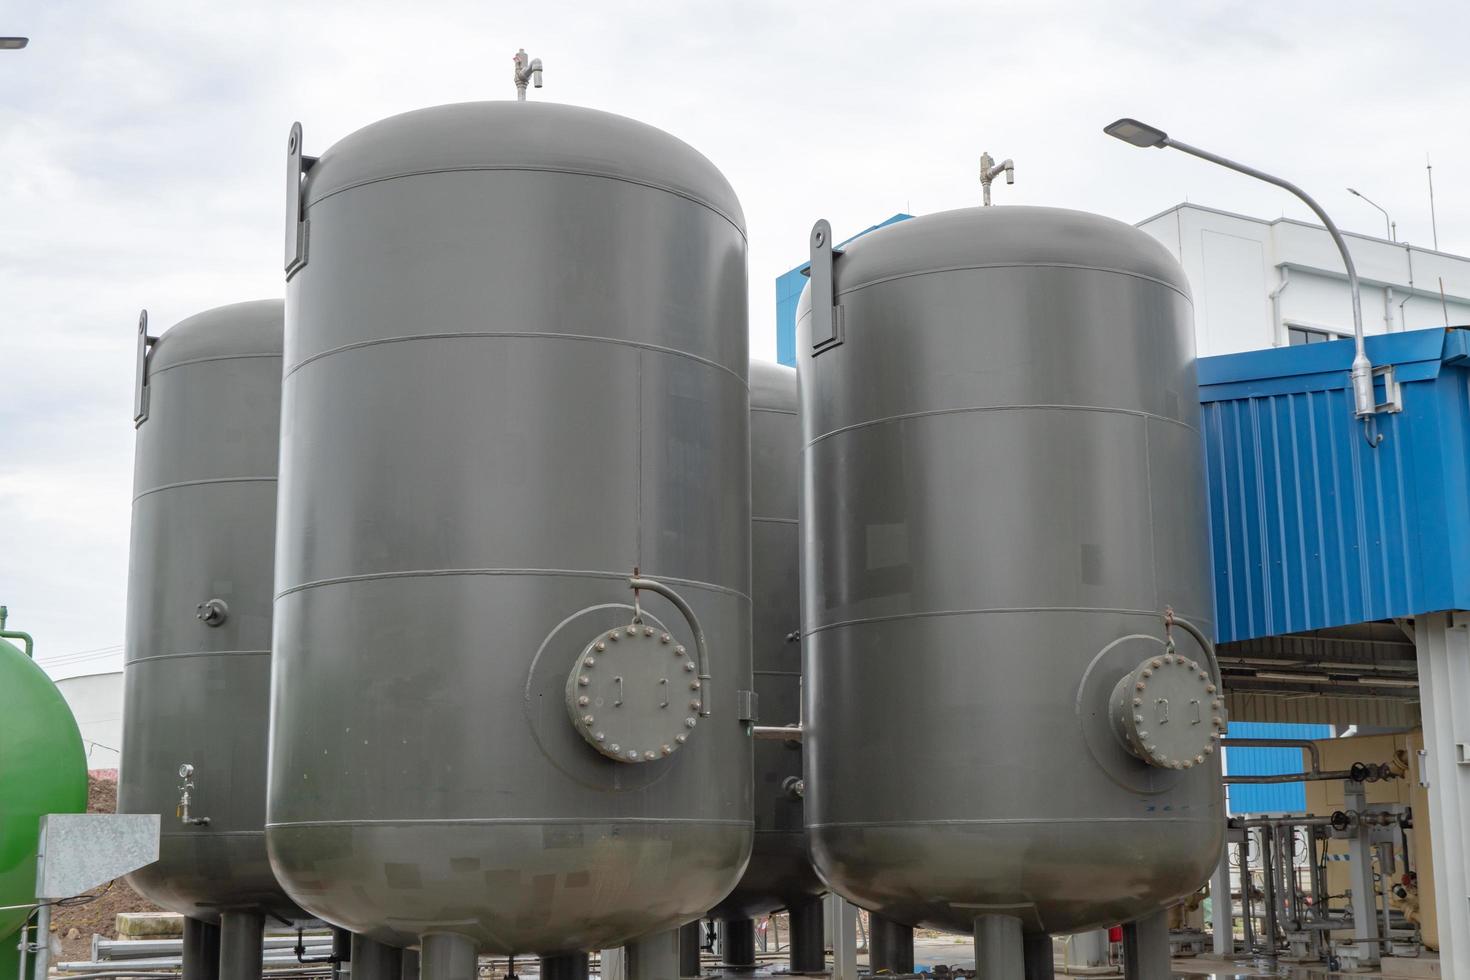 Air receiver tank for air compressor on power plant project. The photo is suitable to use for industry background photography, power plant poster and electricity content media.